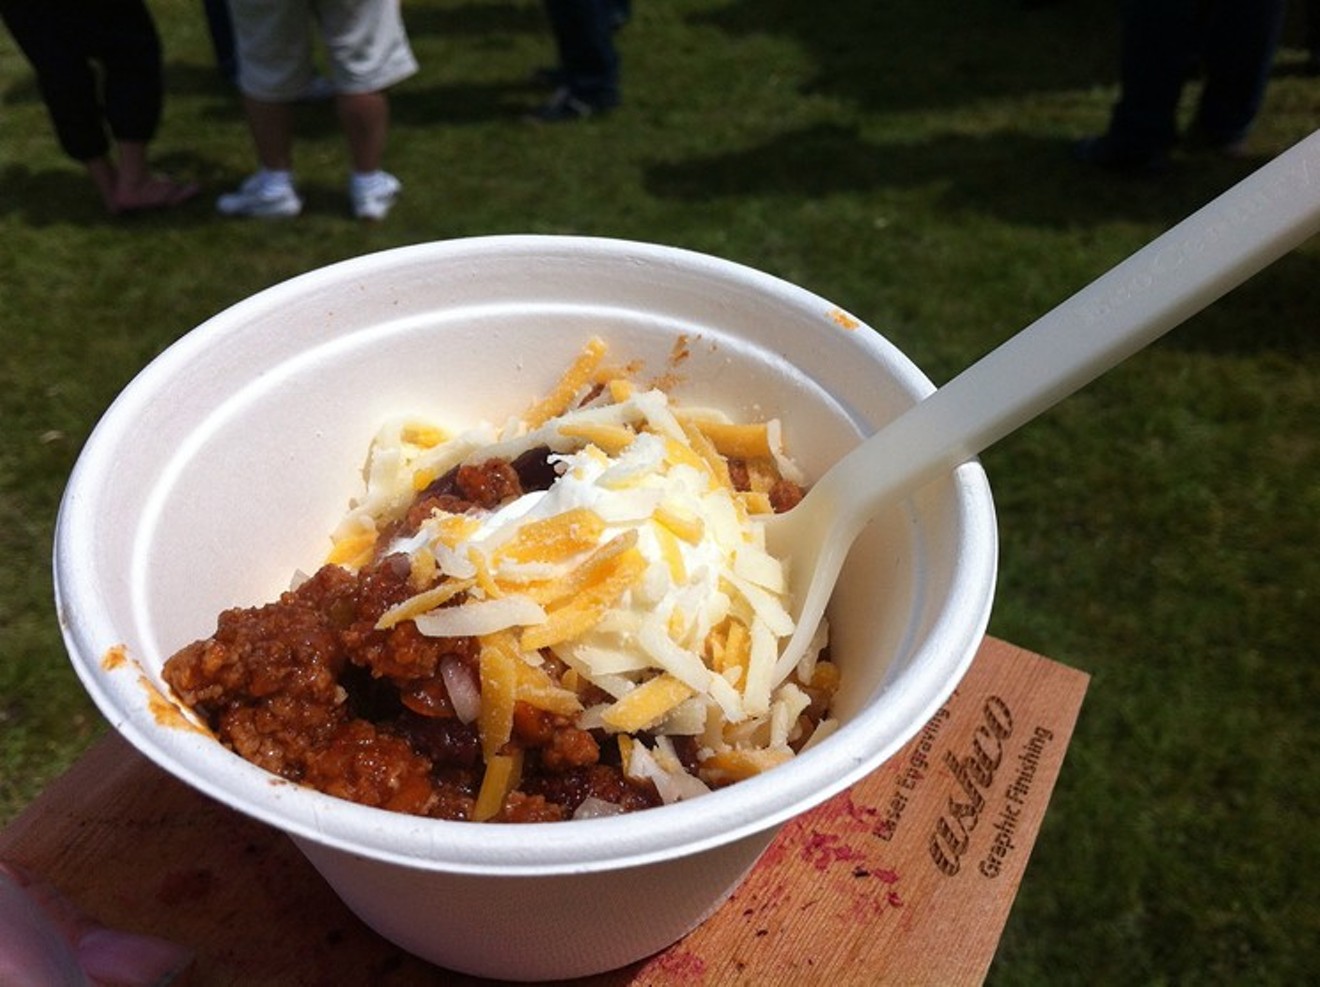 Yaga's ninth annual Chili Quest and Beer Fest returns to Galveston Island.